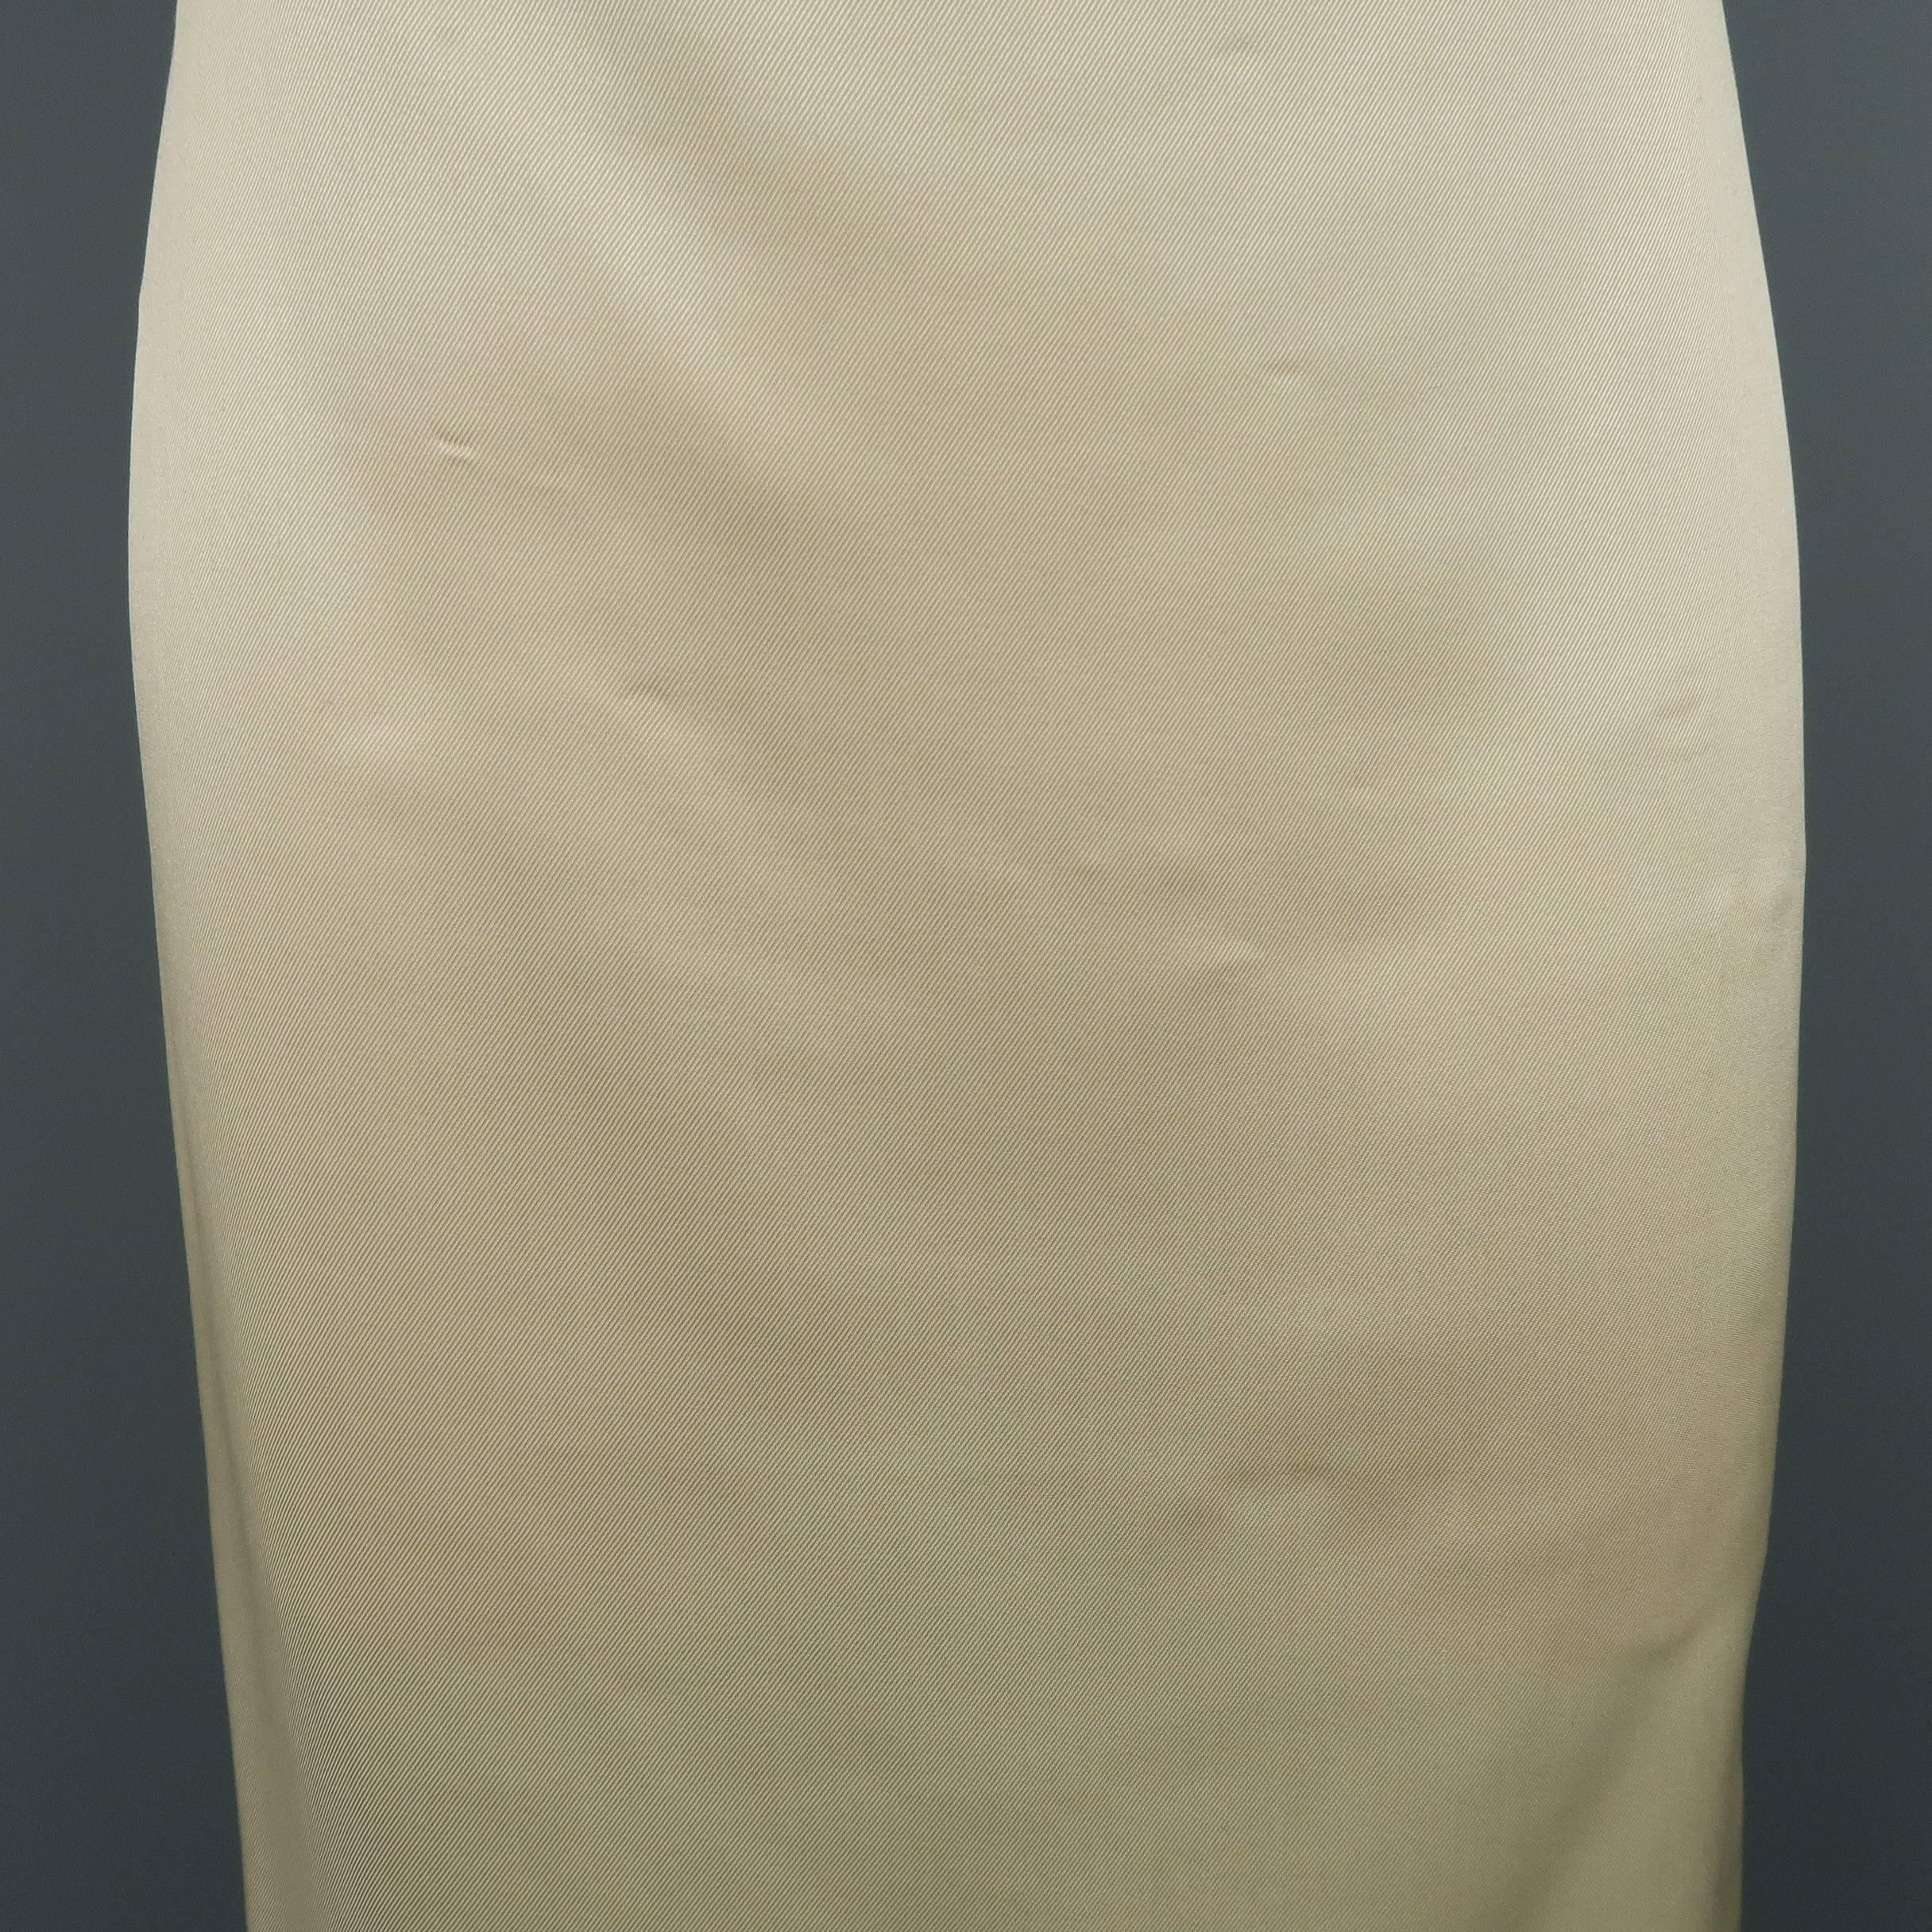 RALPH LAUREN COLLECTION pencil skirt comes in a light beige silk twill with a classic straight silhouette. Wear throughout. As-is. Made in USA.
 
Fair Pre-Owned Condition.
Marked: 6
 
Measurements:
 
Waist: 31 in.
Hip: 38 in.
Length: 25.5 in.
